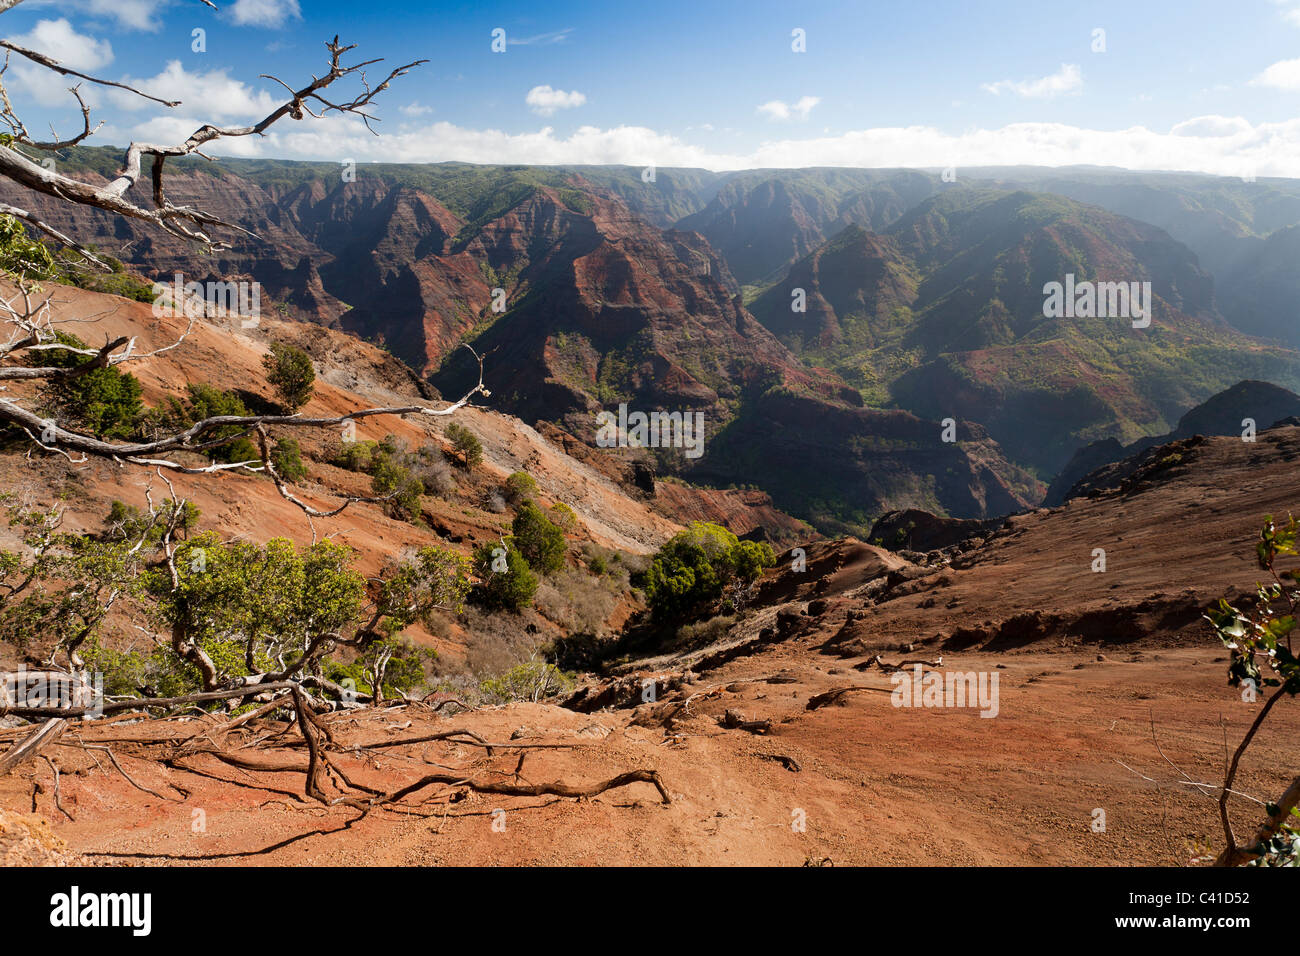 Pu'u Hina Hina Lookout. A red rock slide and dry branches lead down into the rough red canyon lands in the heart of Kaua'i. Stock Photo